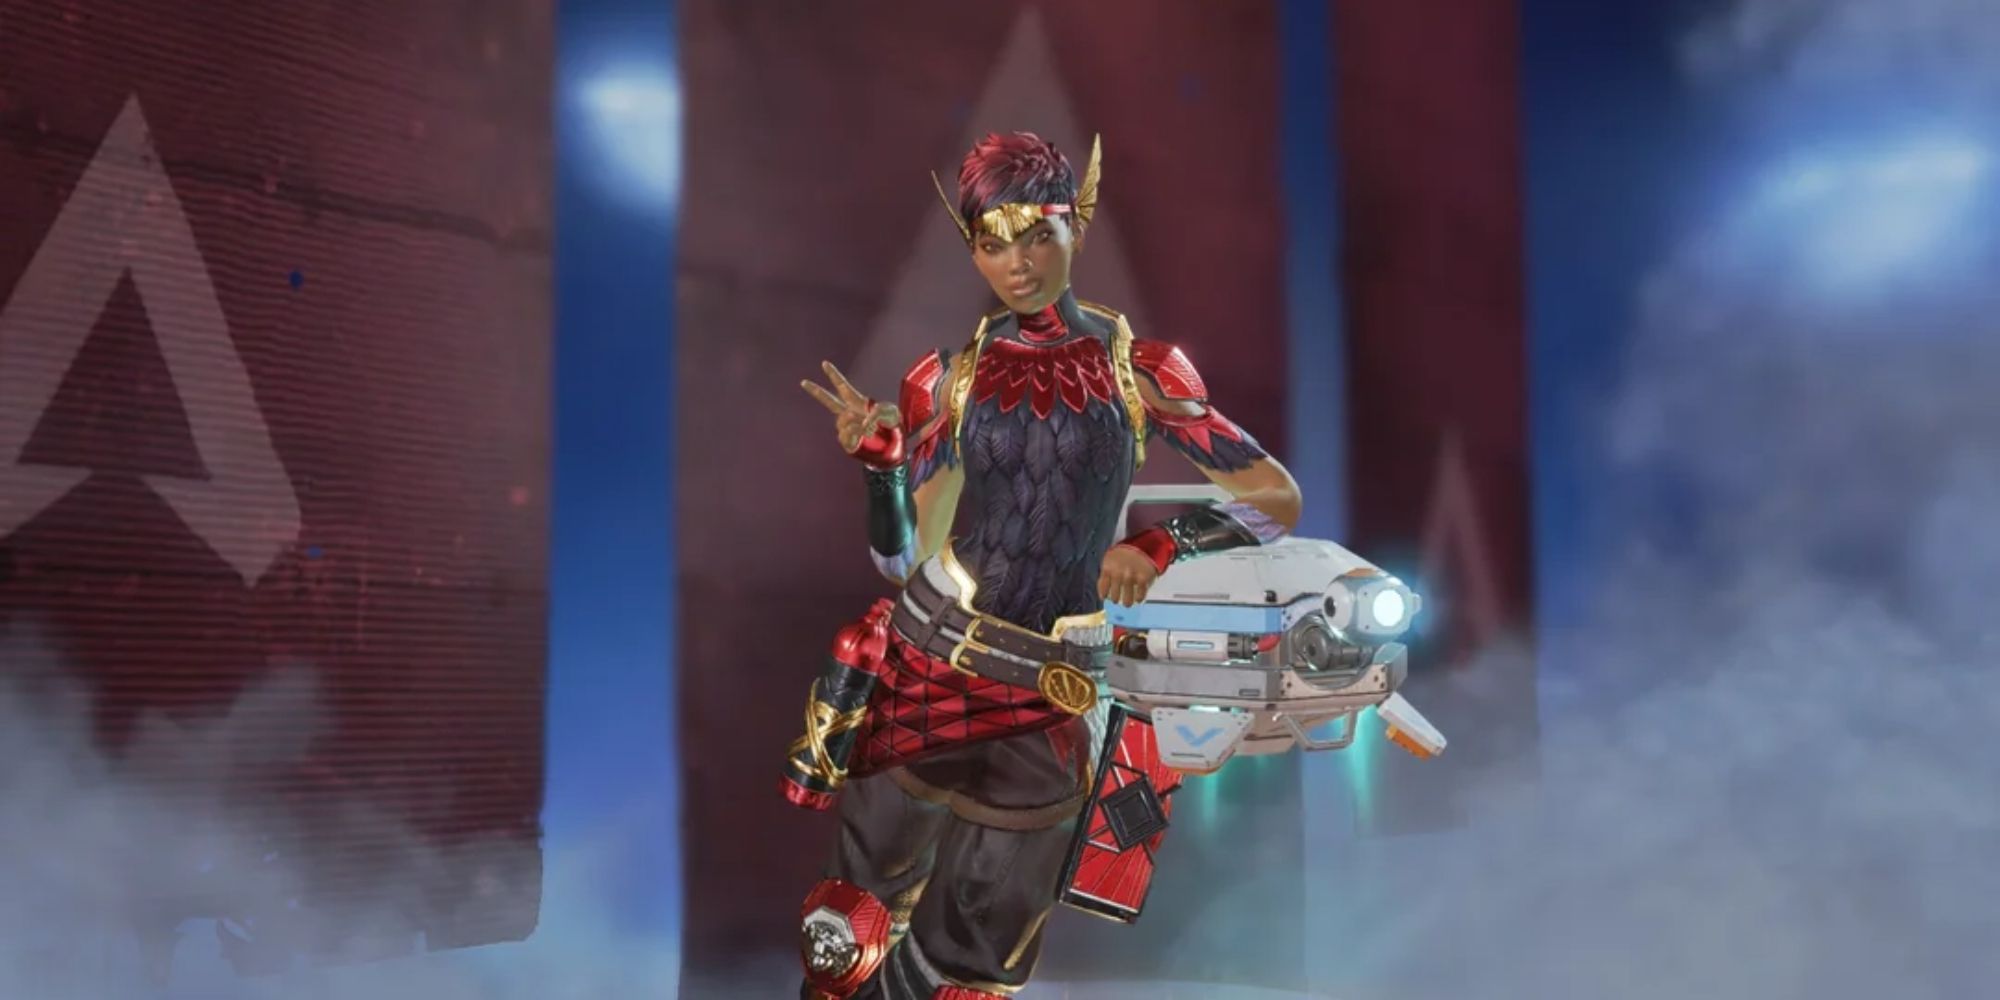 An image of Lifeline's Angel of Death skin from Apex Legends